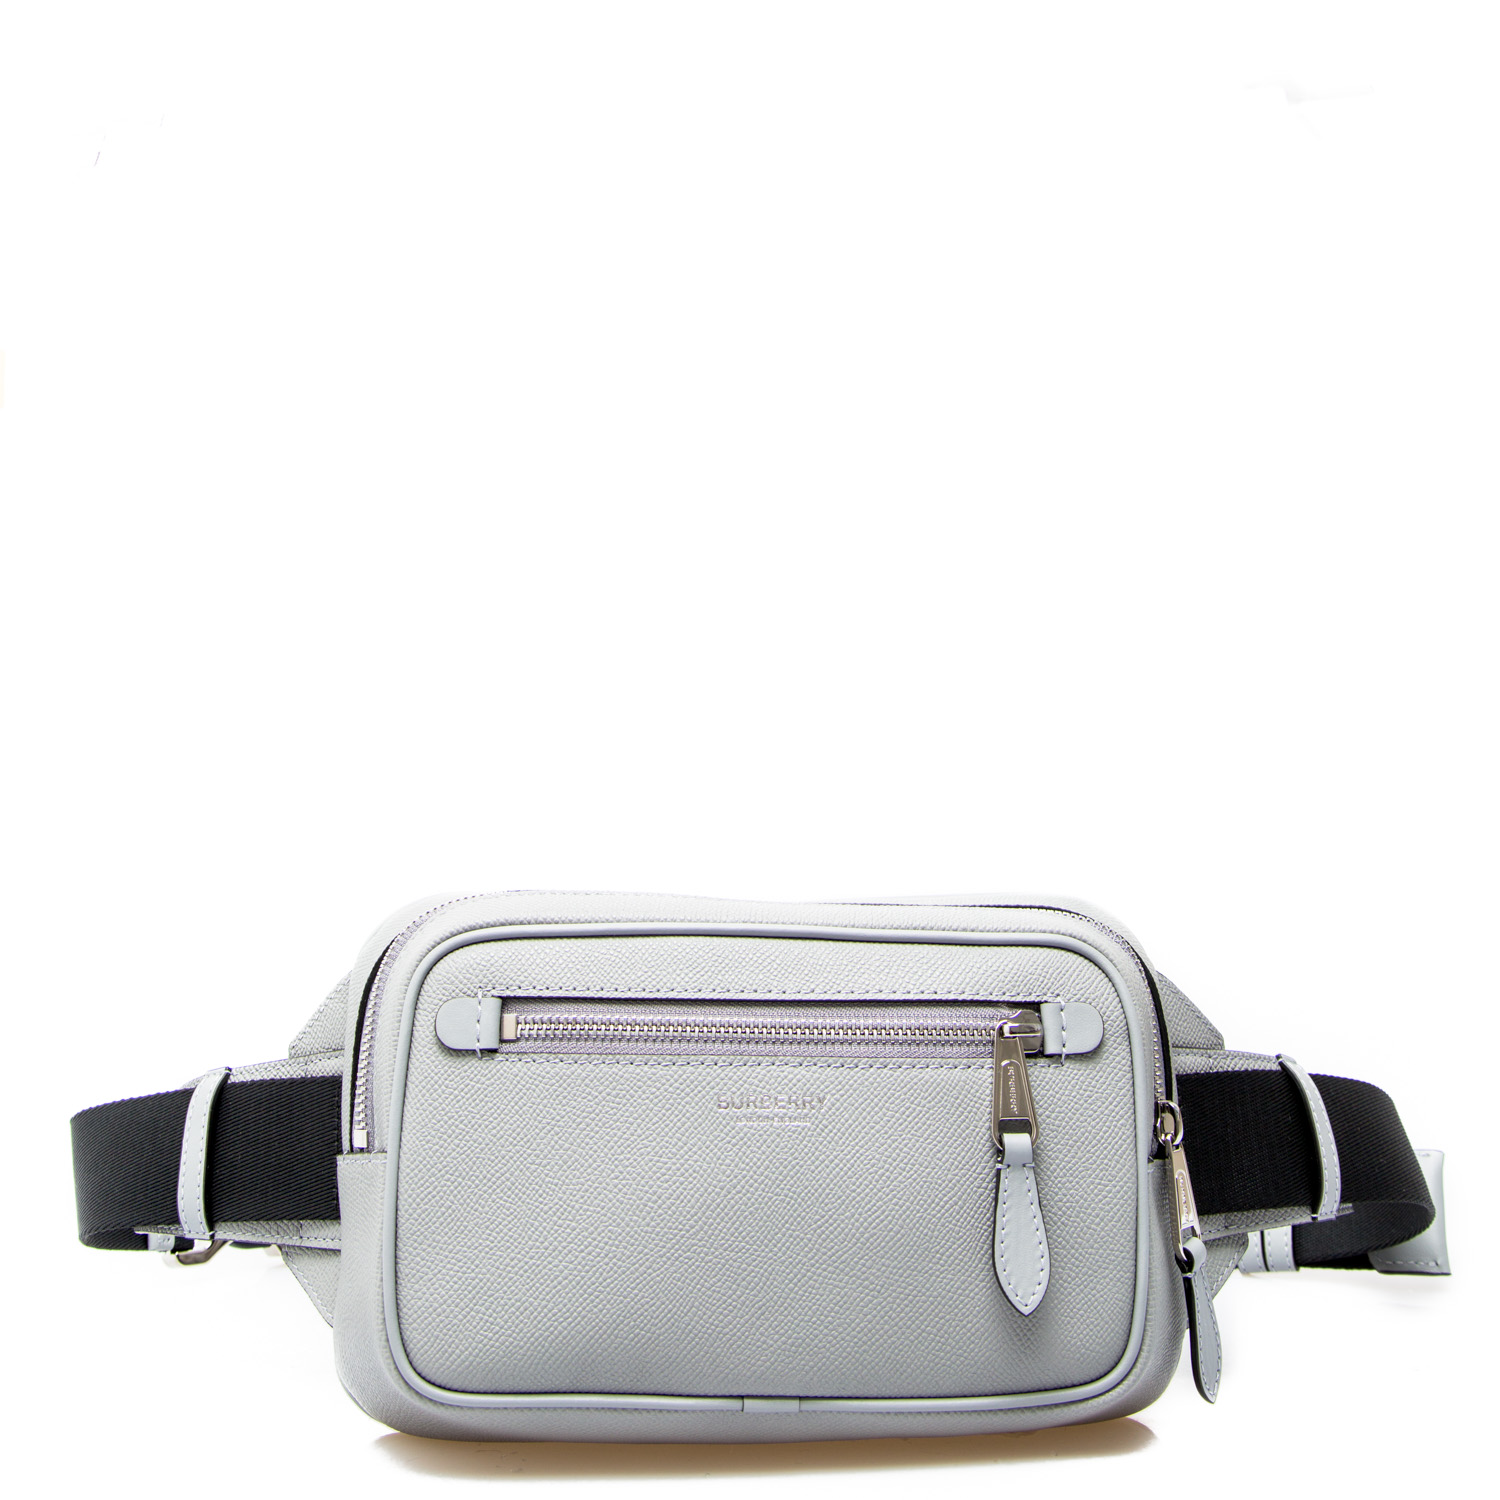 burberry fanny pack mens